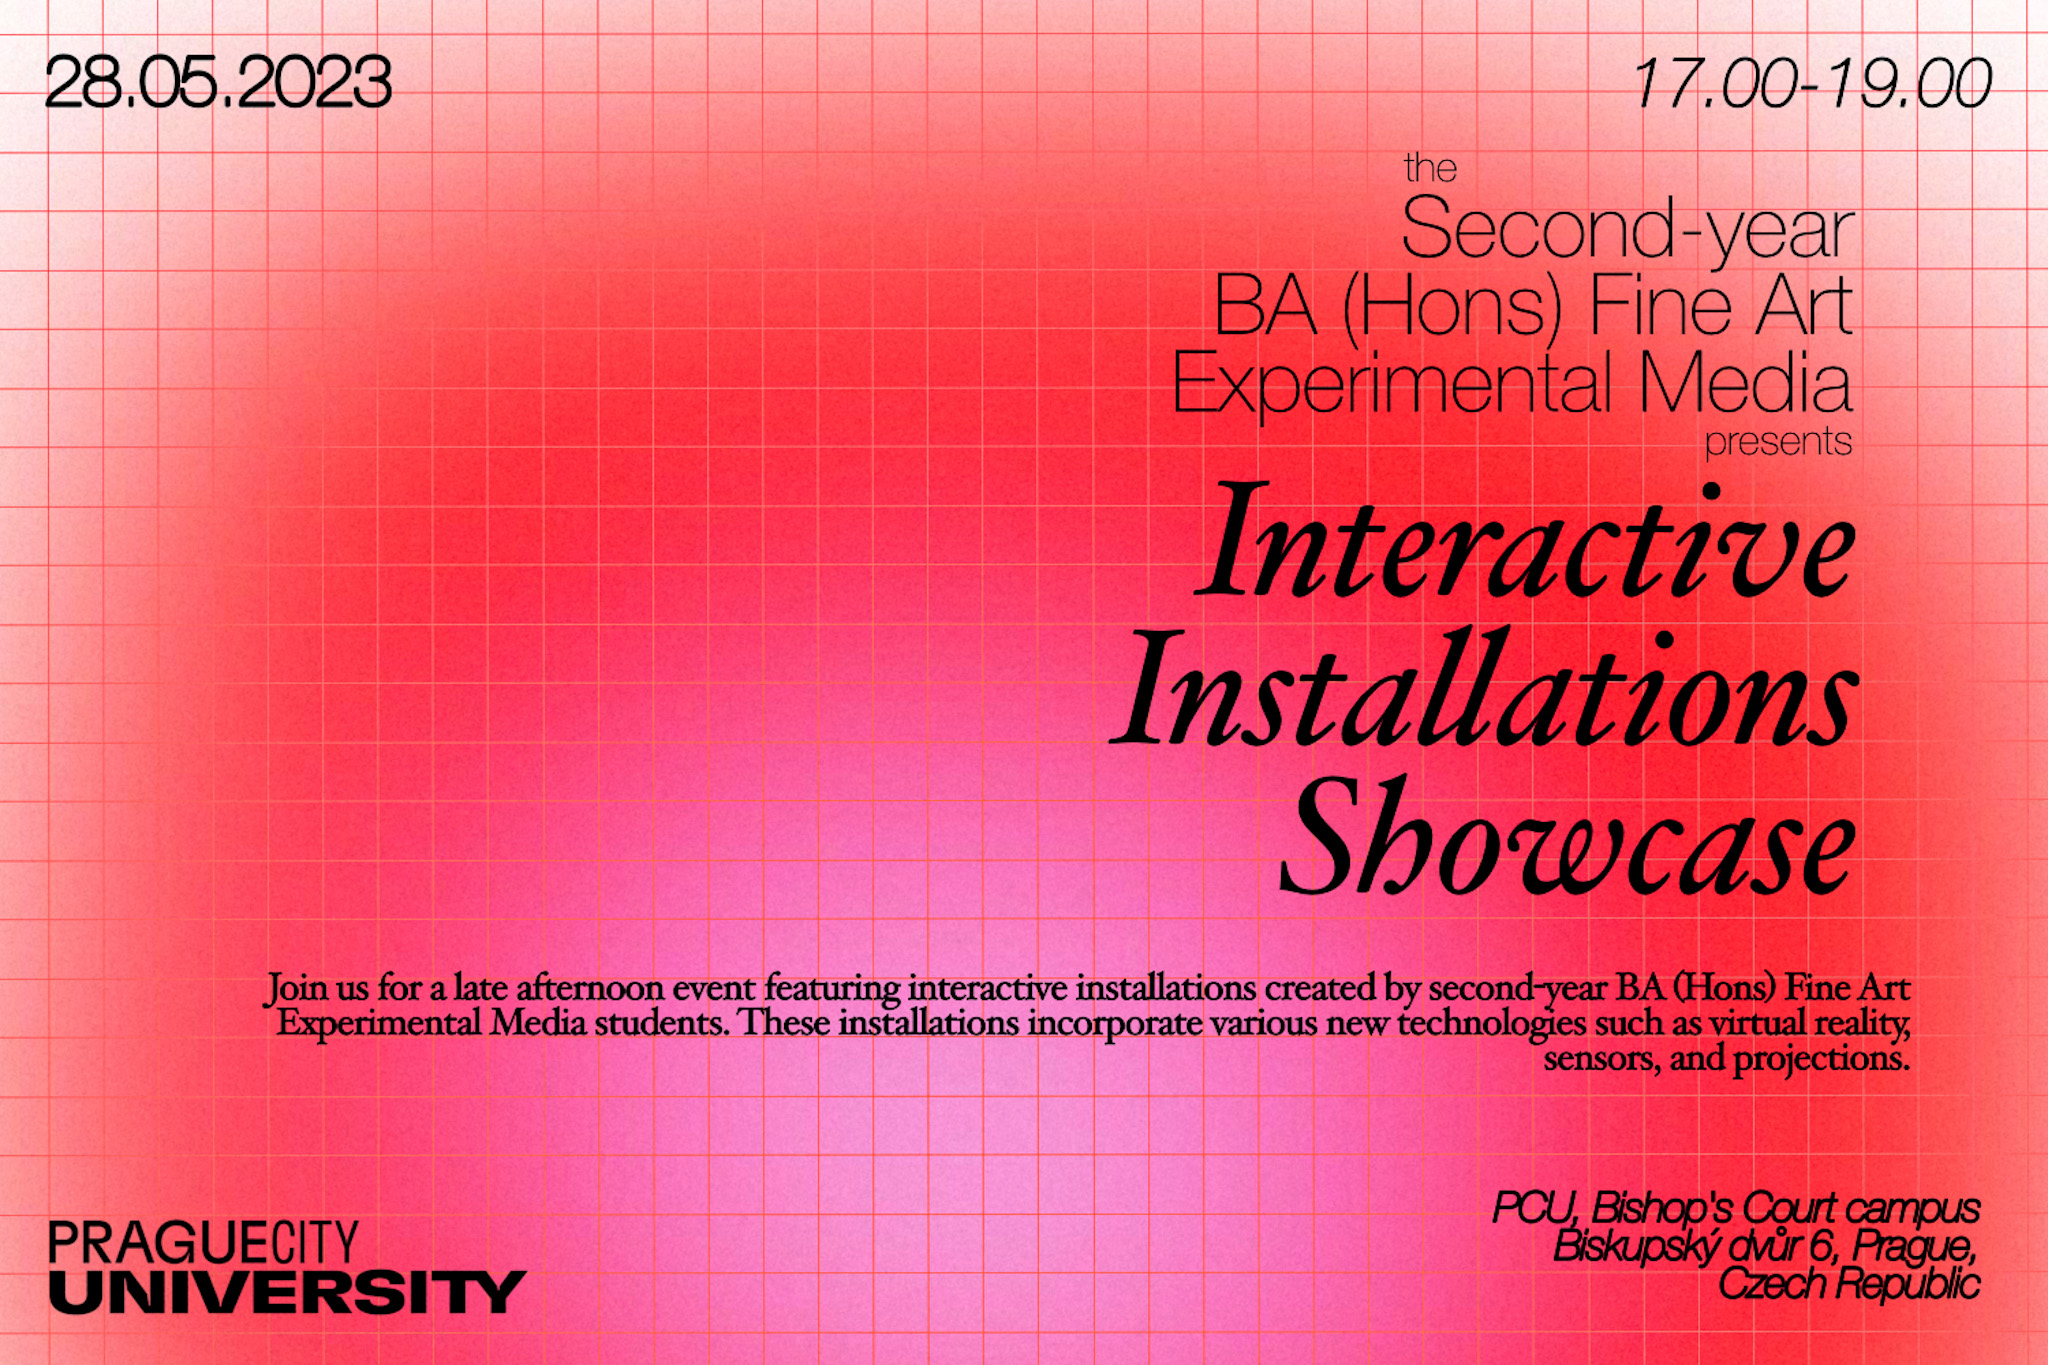 BA (Hons) Fine Art Experimental Media presents Interactive Installation Showcase at Bishop's Court Campus on 28.5.2023 at 17.00